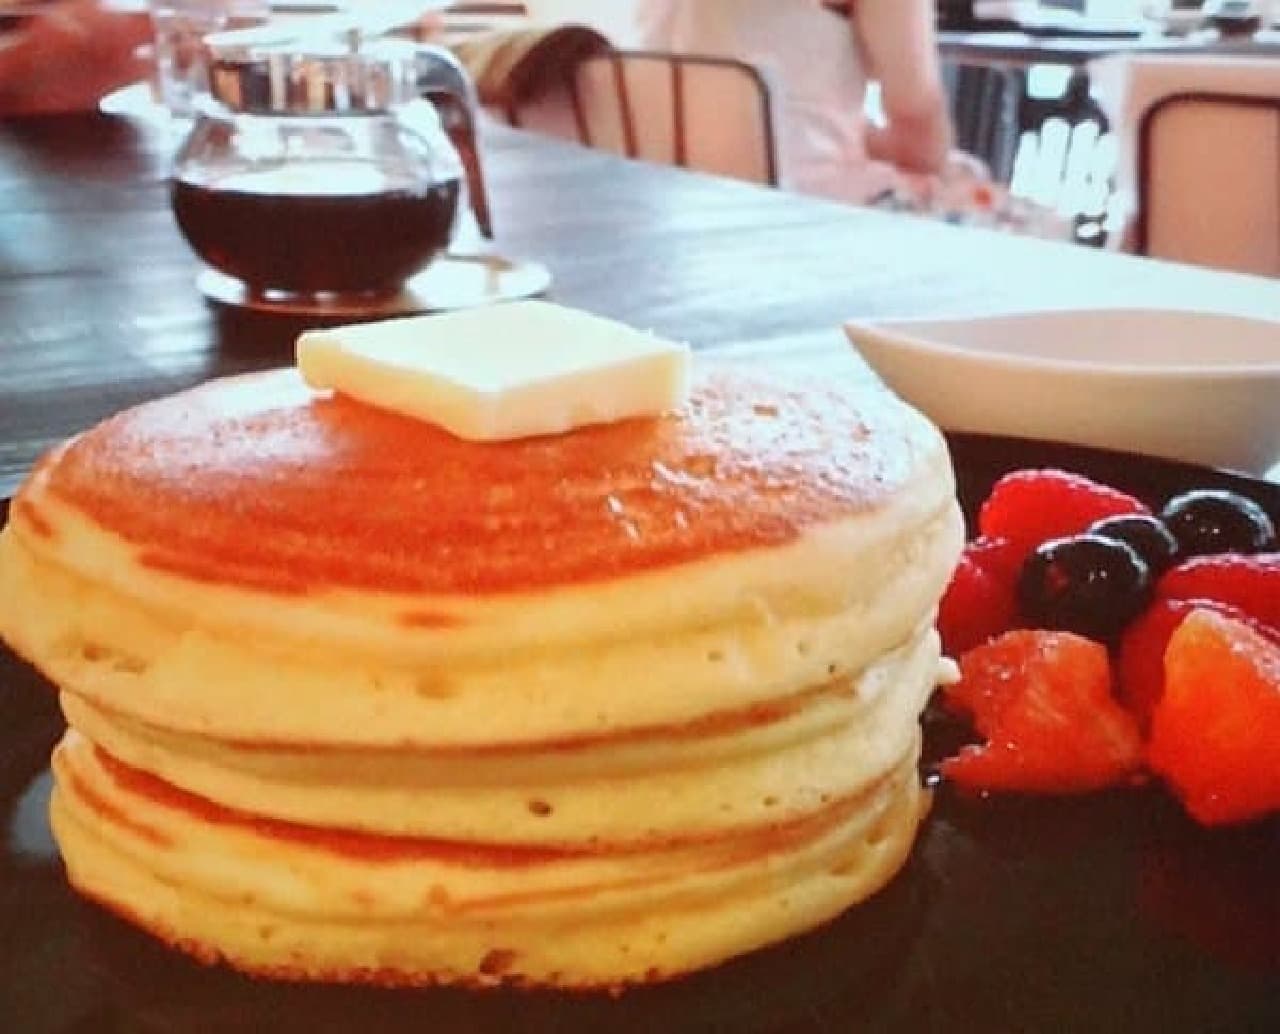 For example, we were talking about such pancakes!